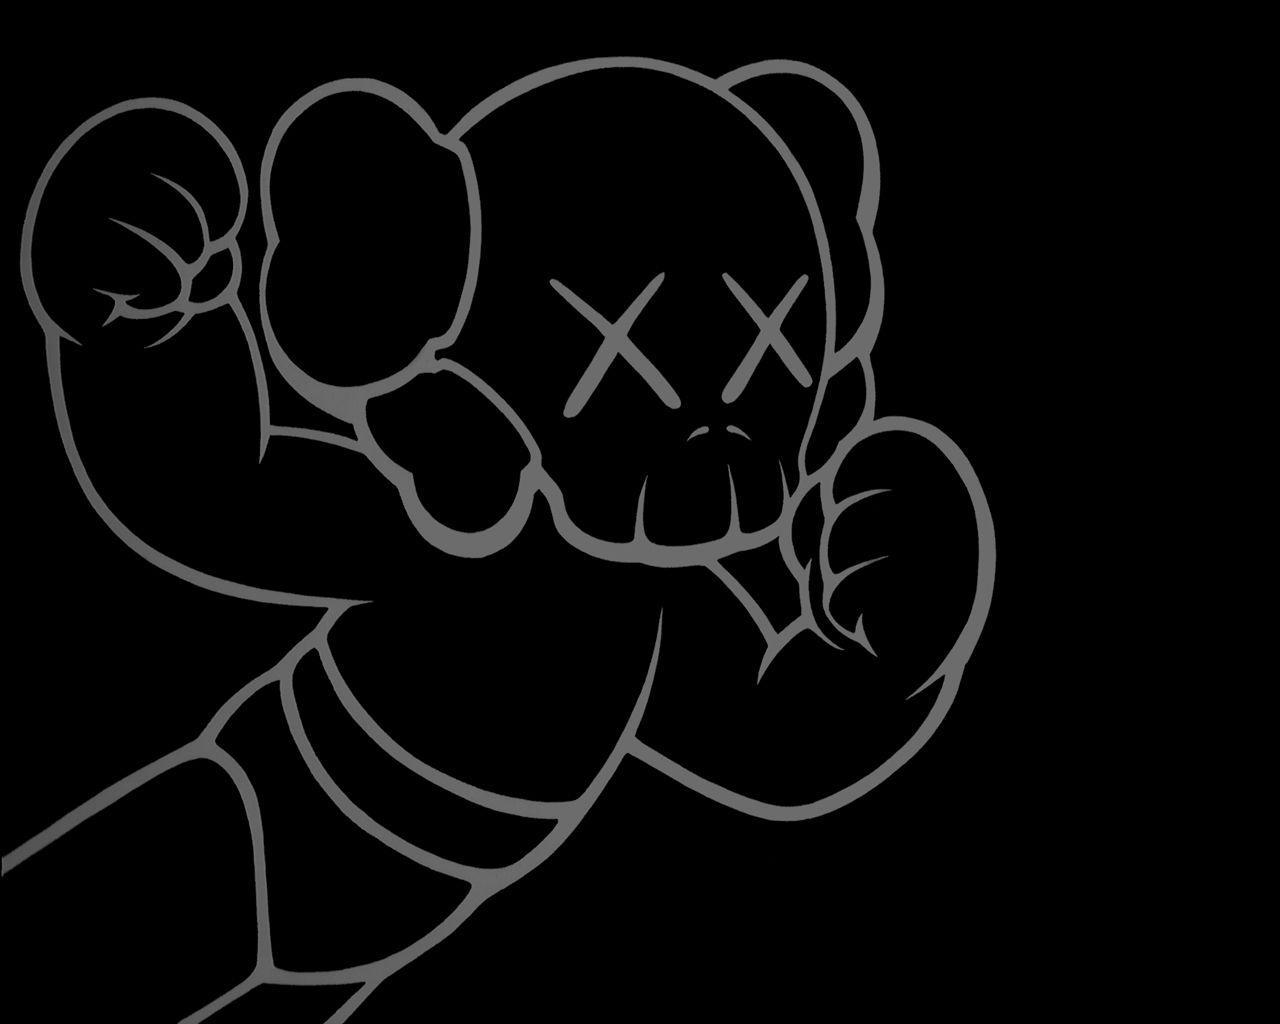 Pin by Jason Chen on JasonCWallpeper  Iphone wallpaper hipster Kaws  wallpaper Kaws iphone wallpaper